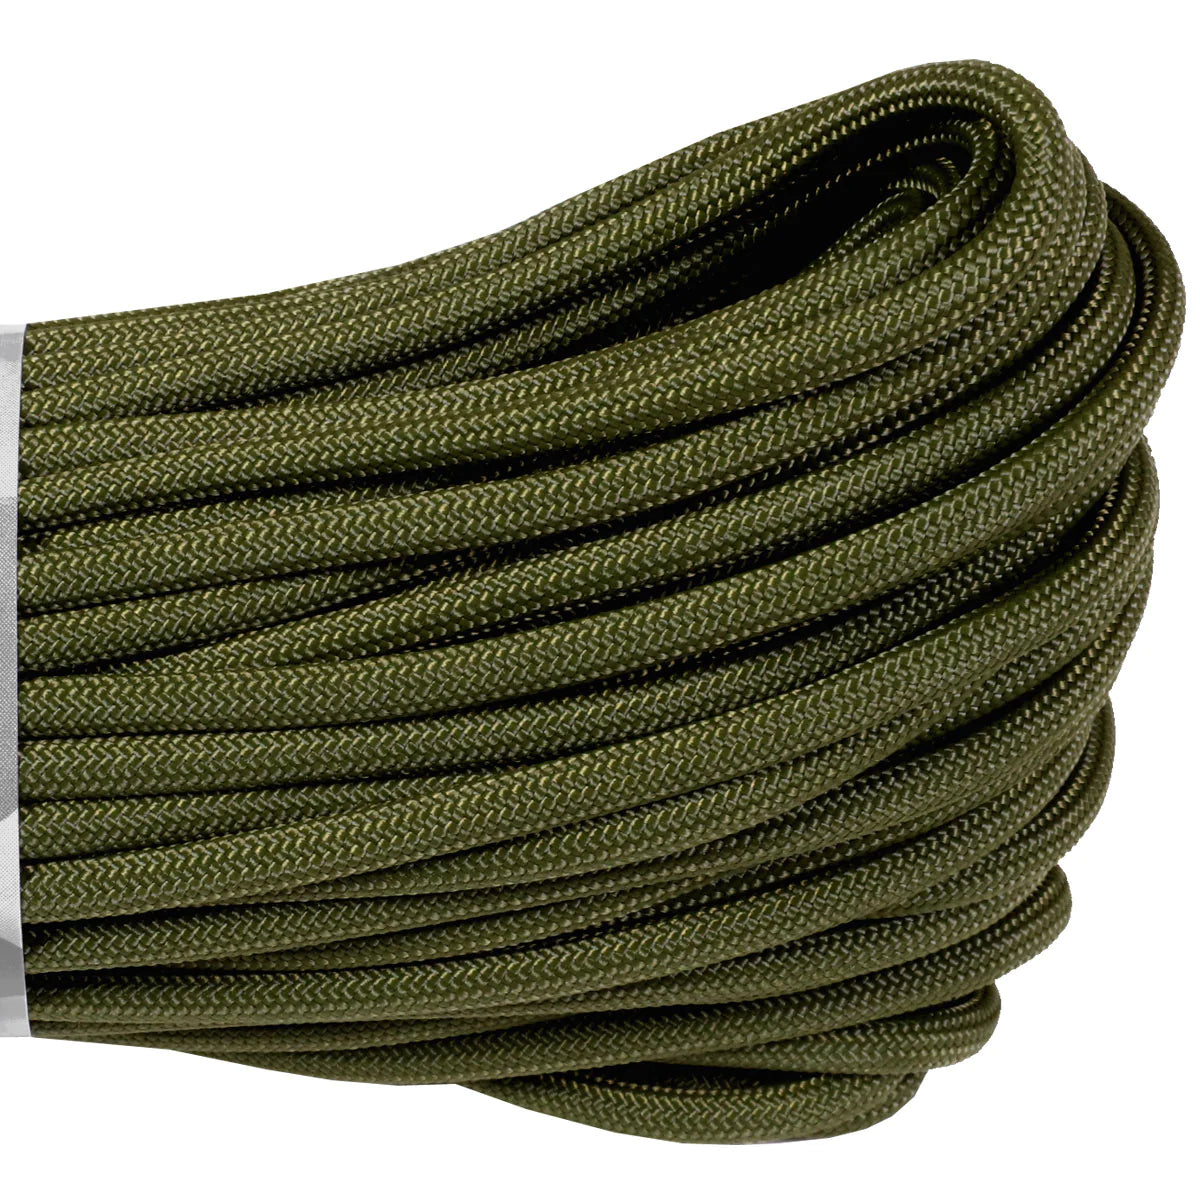 Olive Drab - OD - 100ft - 550 Paracord